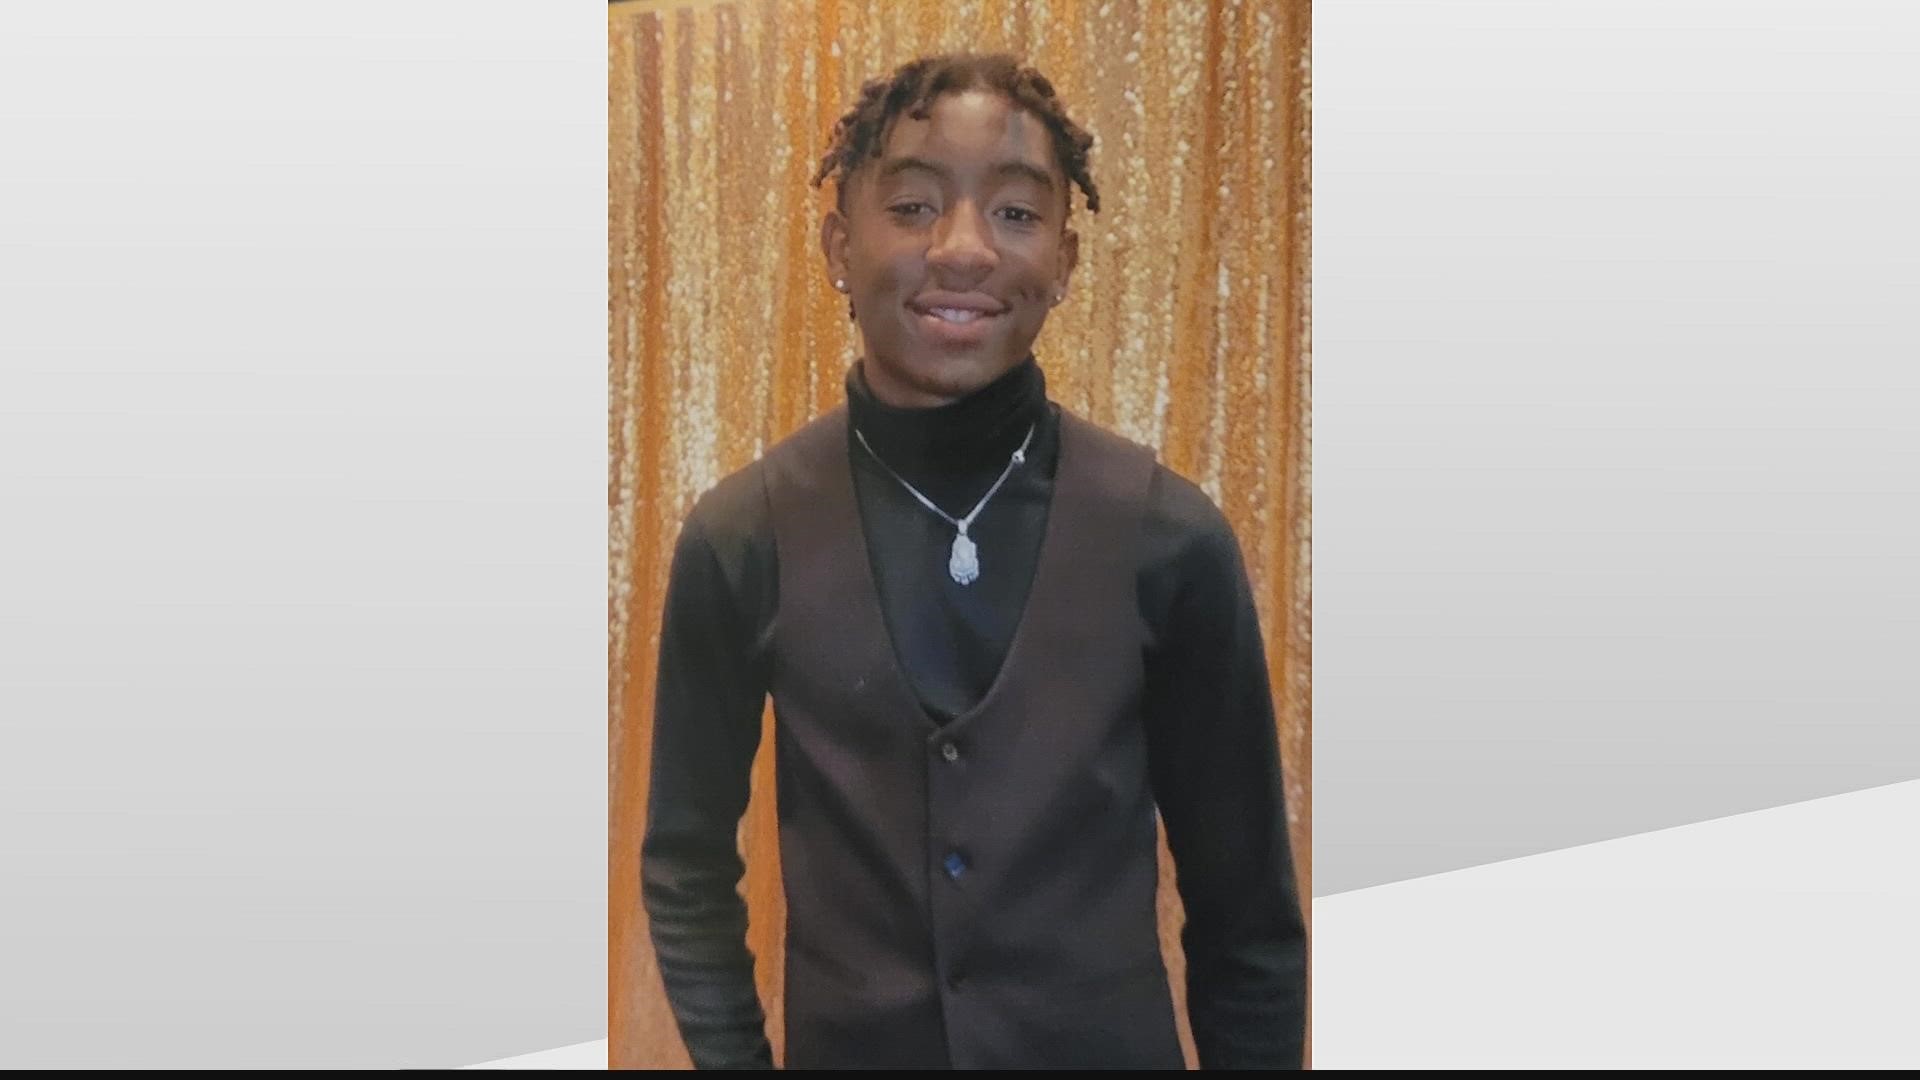 The Marietta Department is now offering a $10,000 reward for information in the killing of a 17-year-old.